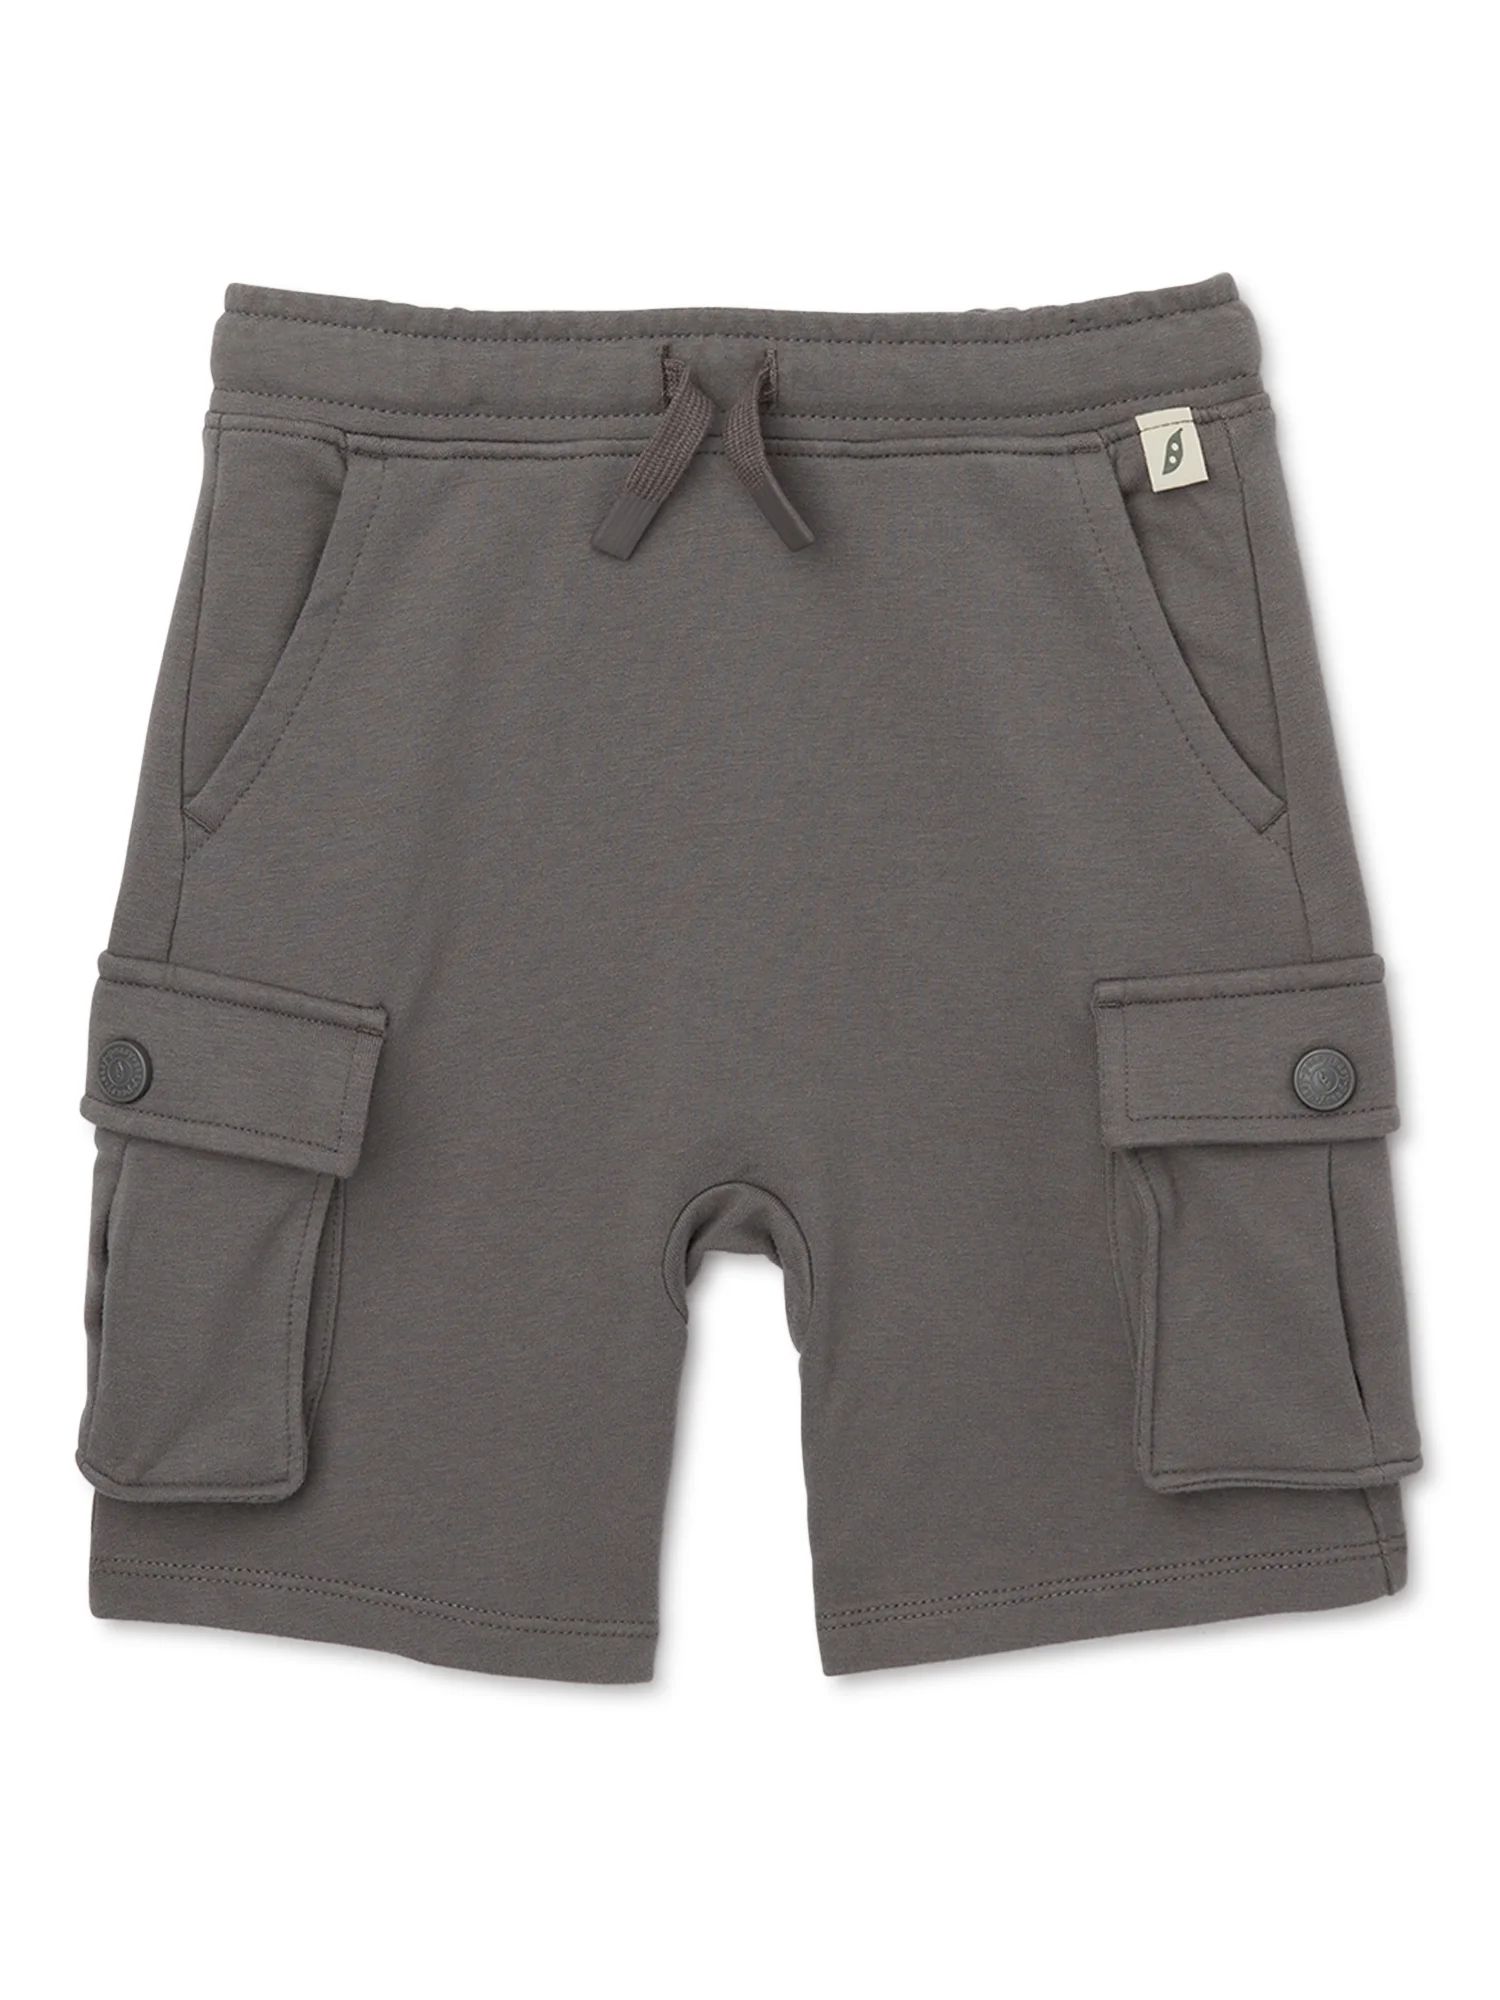 easy-peasy Toddler Boy French Terry Cargo Shorts, Sizes 18M-5T | Walmart (US)